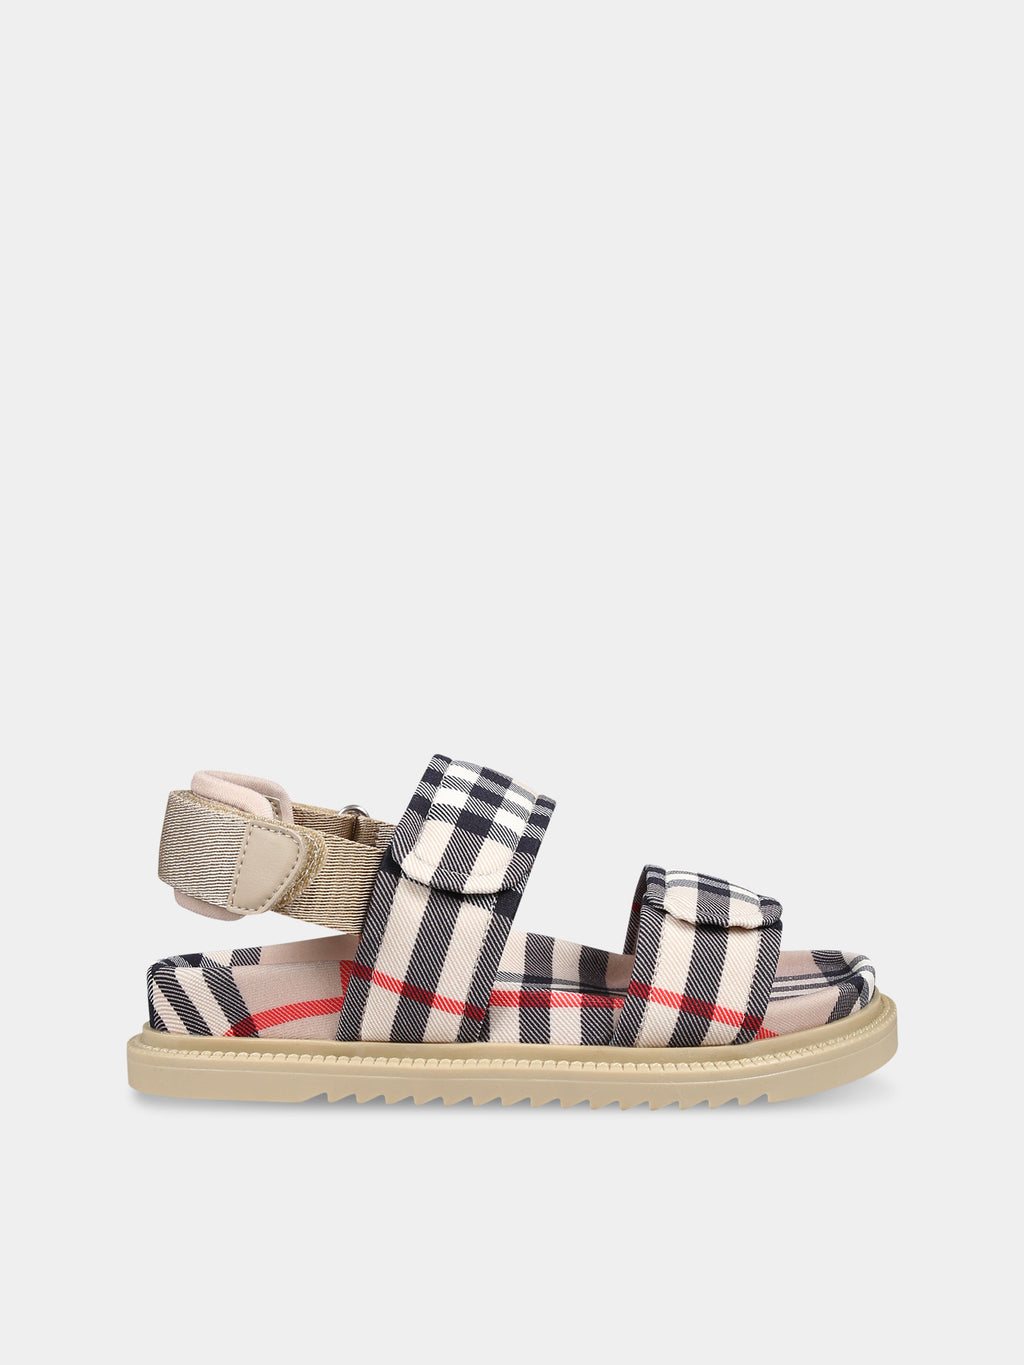 Beige sandals for kids with vintage check